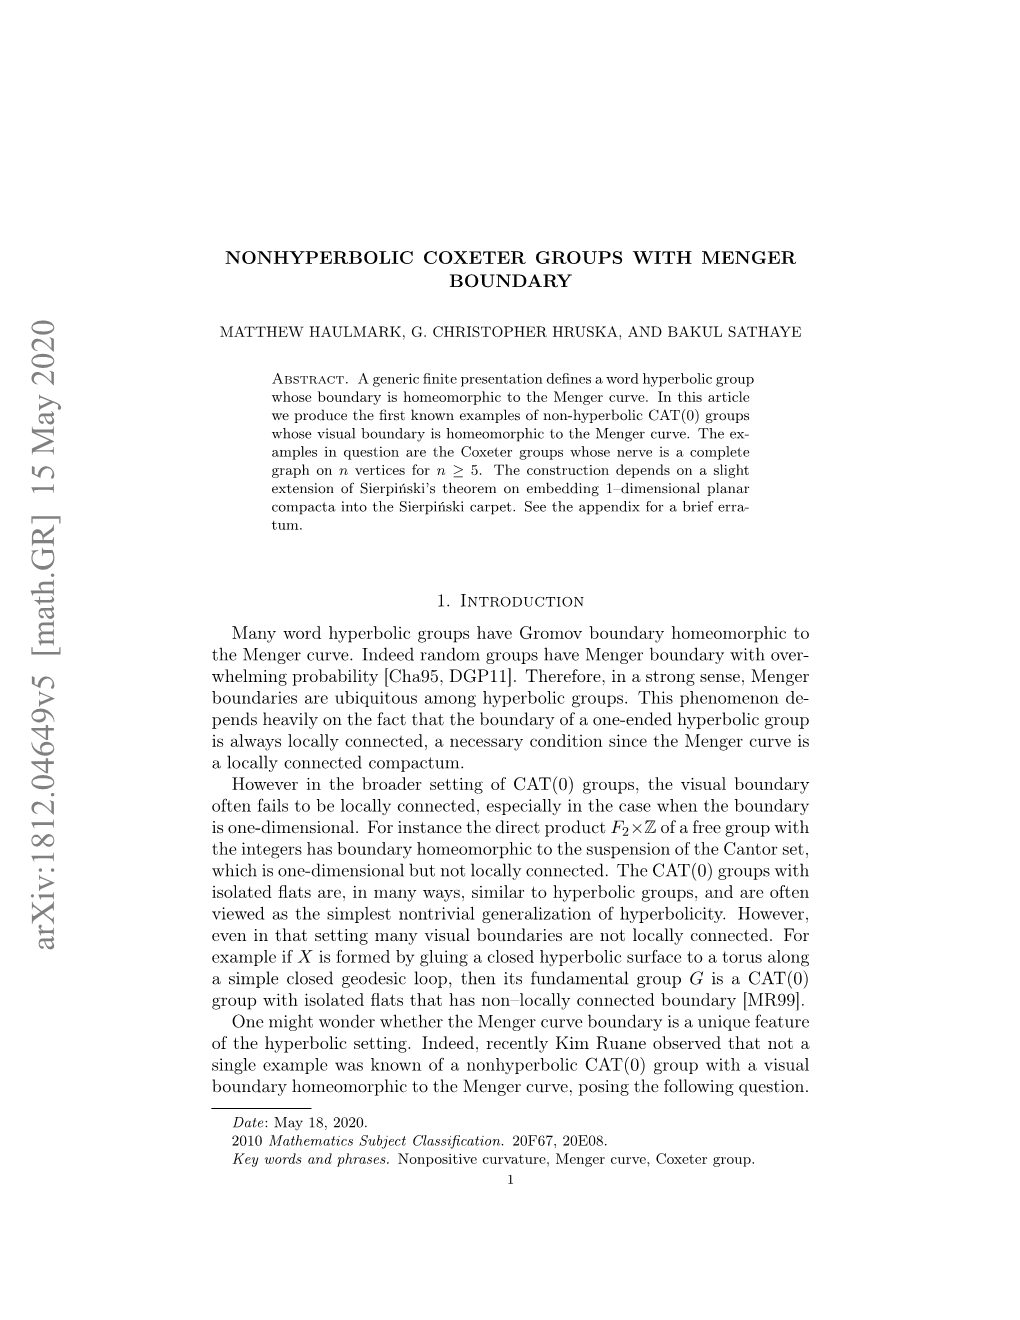 Nonhyperbolic Coxeter Groups with Menger Curve Boundary (With